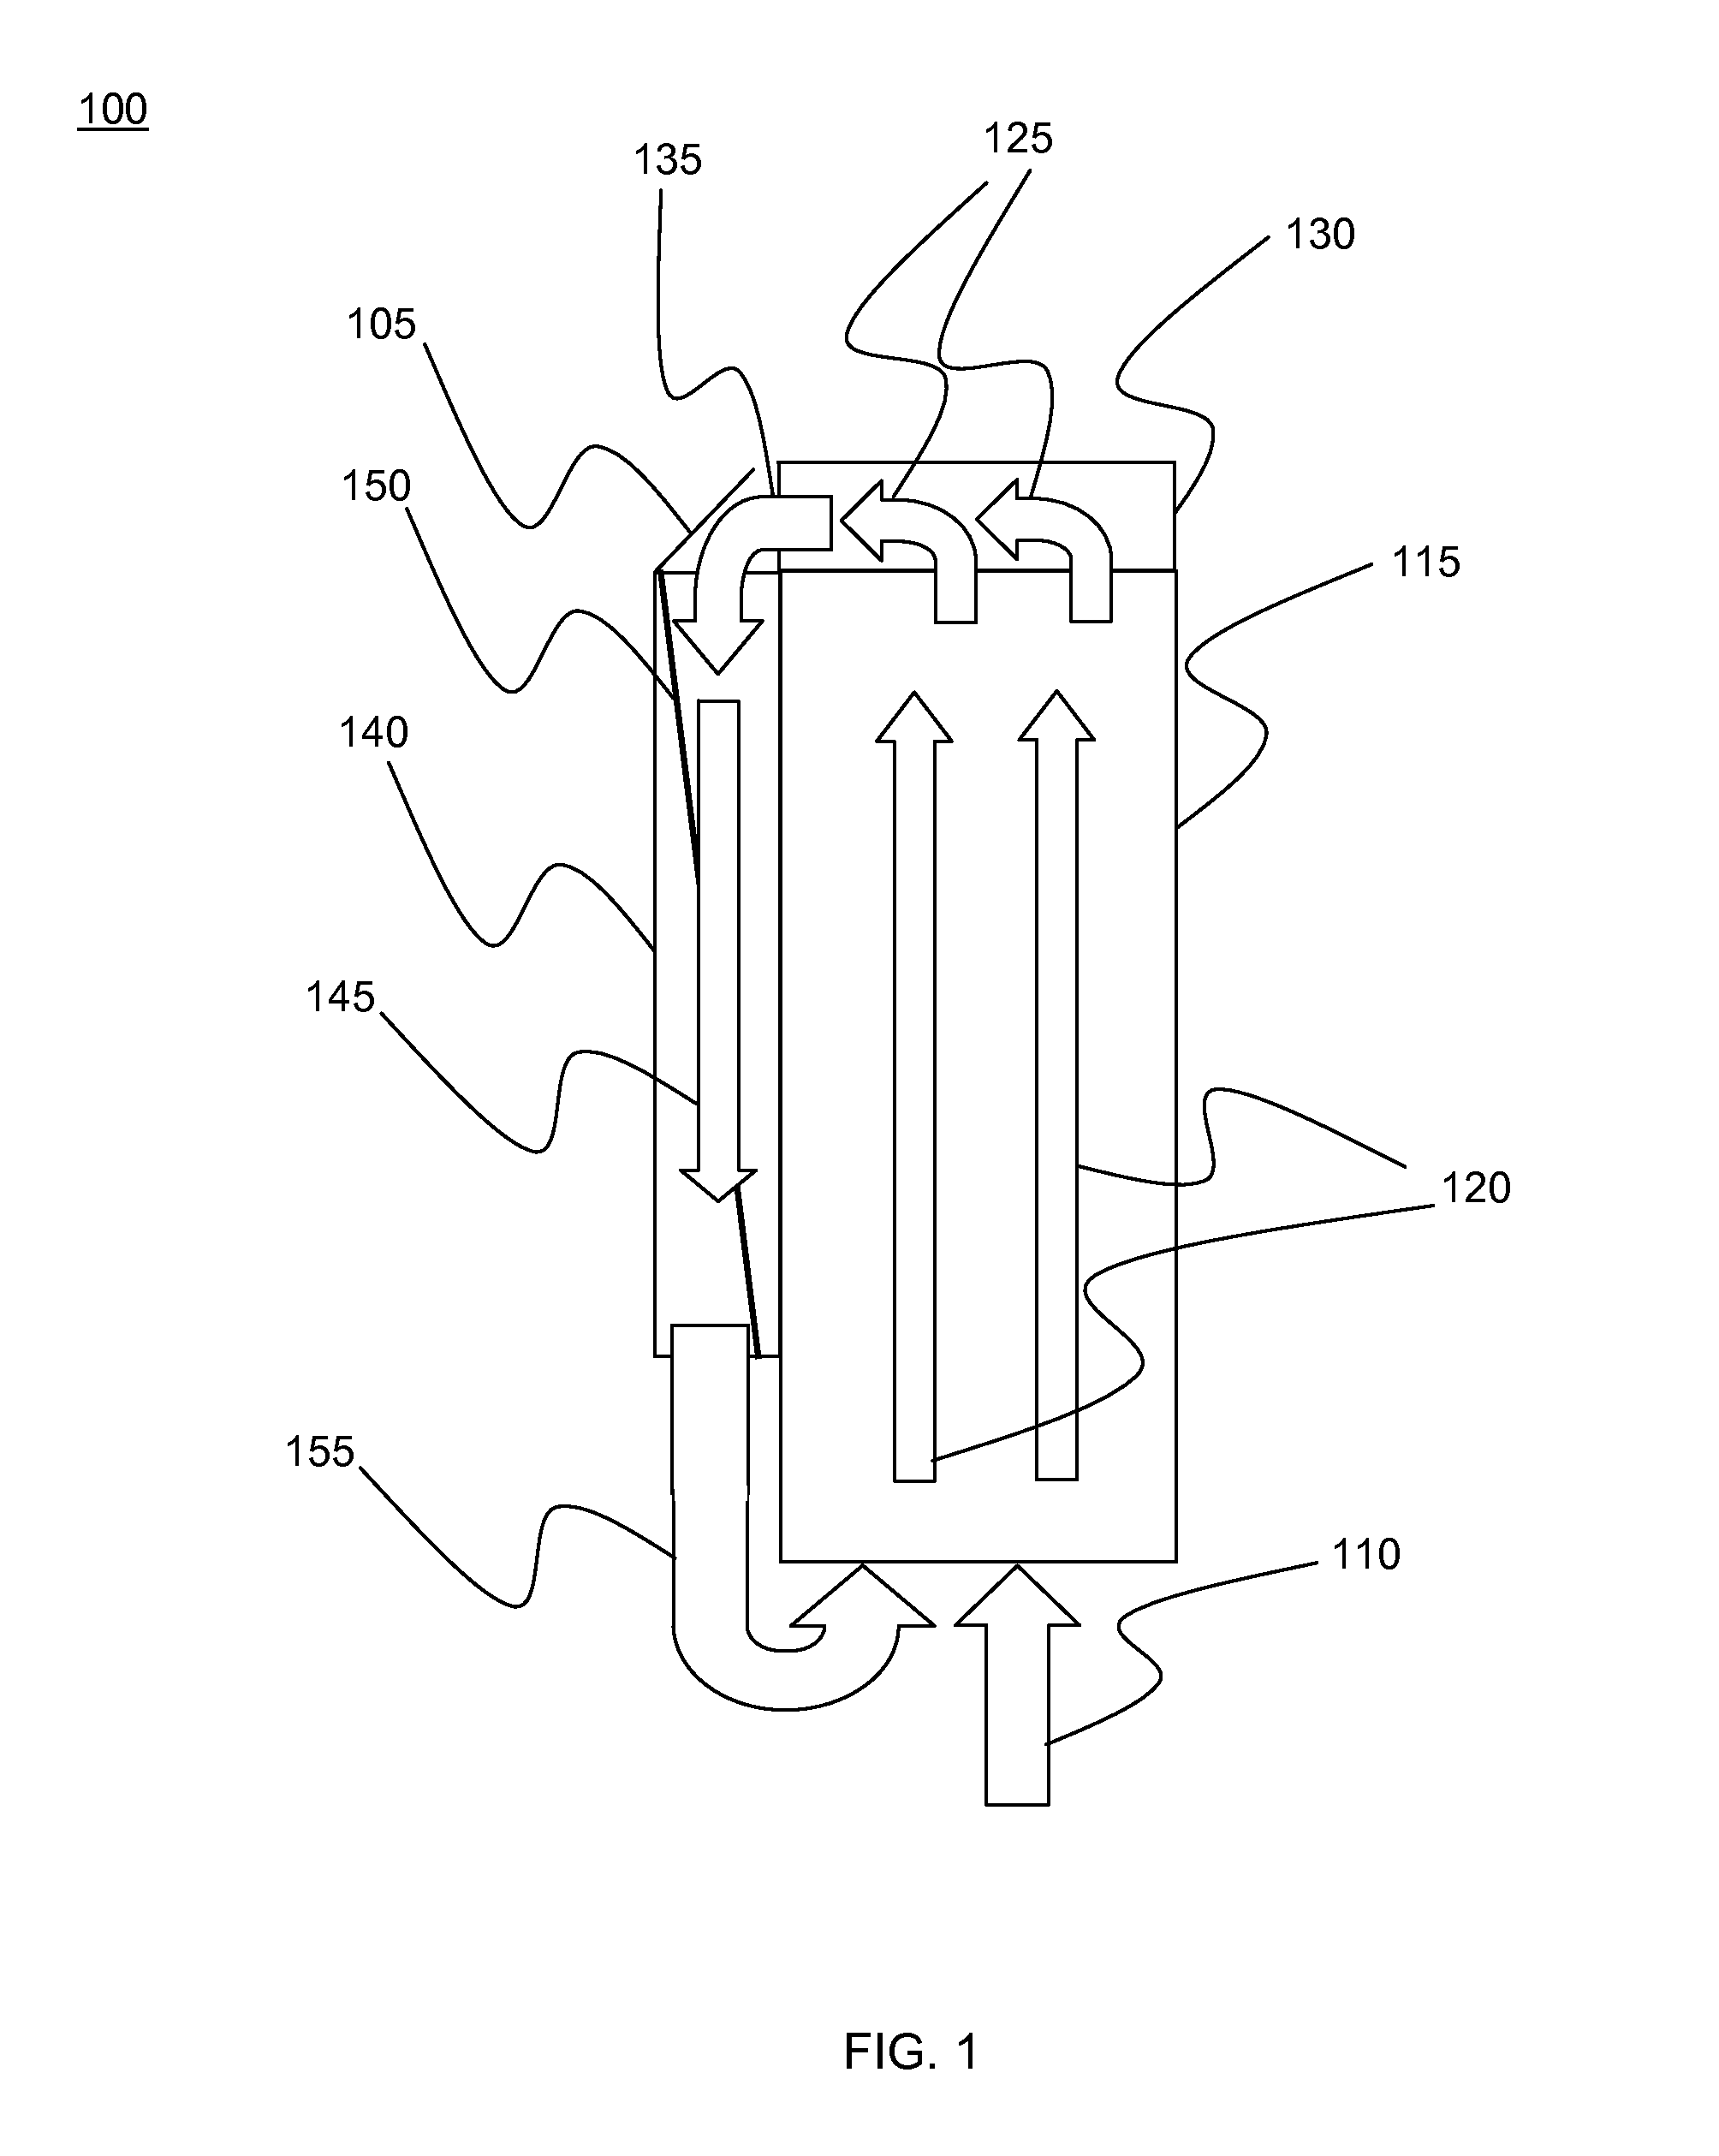 Sidecar in-row cooling apparatus and method for equipment within an enclosure